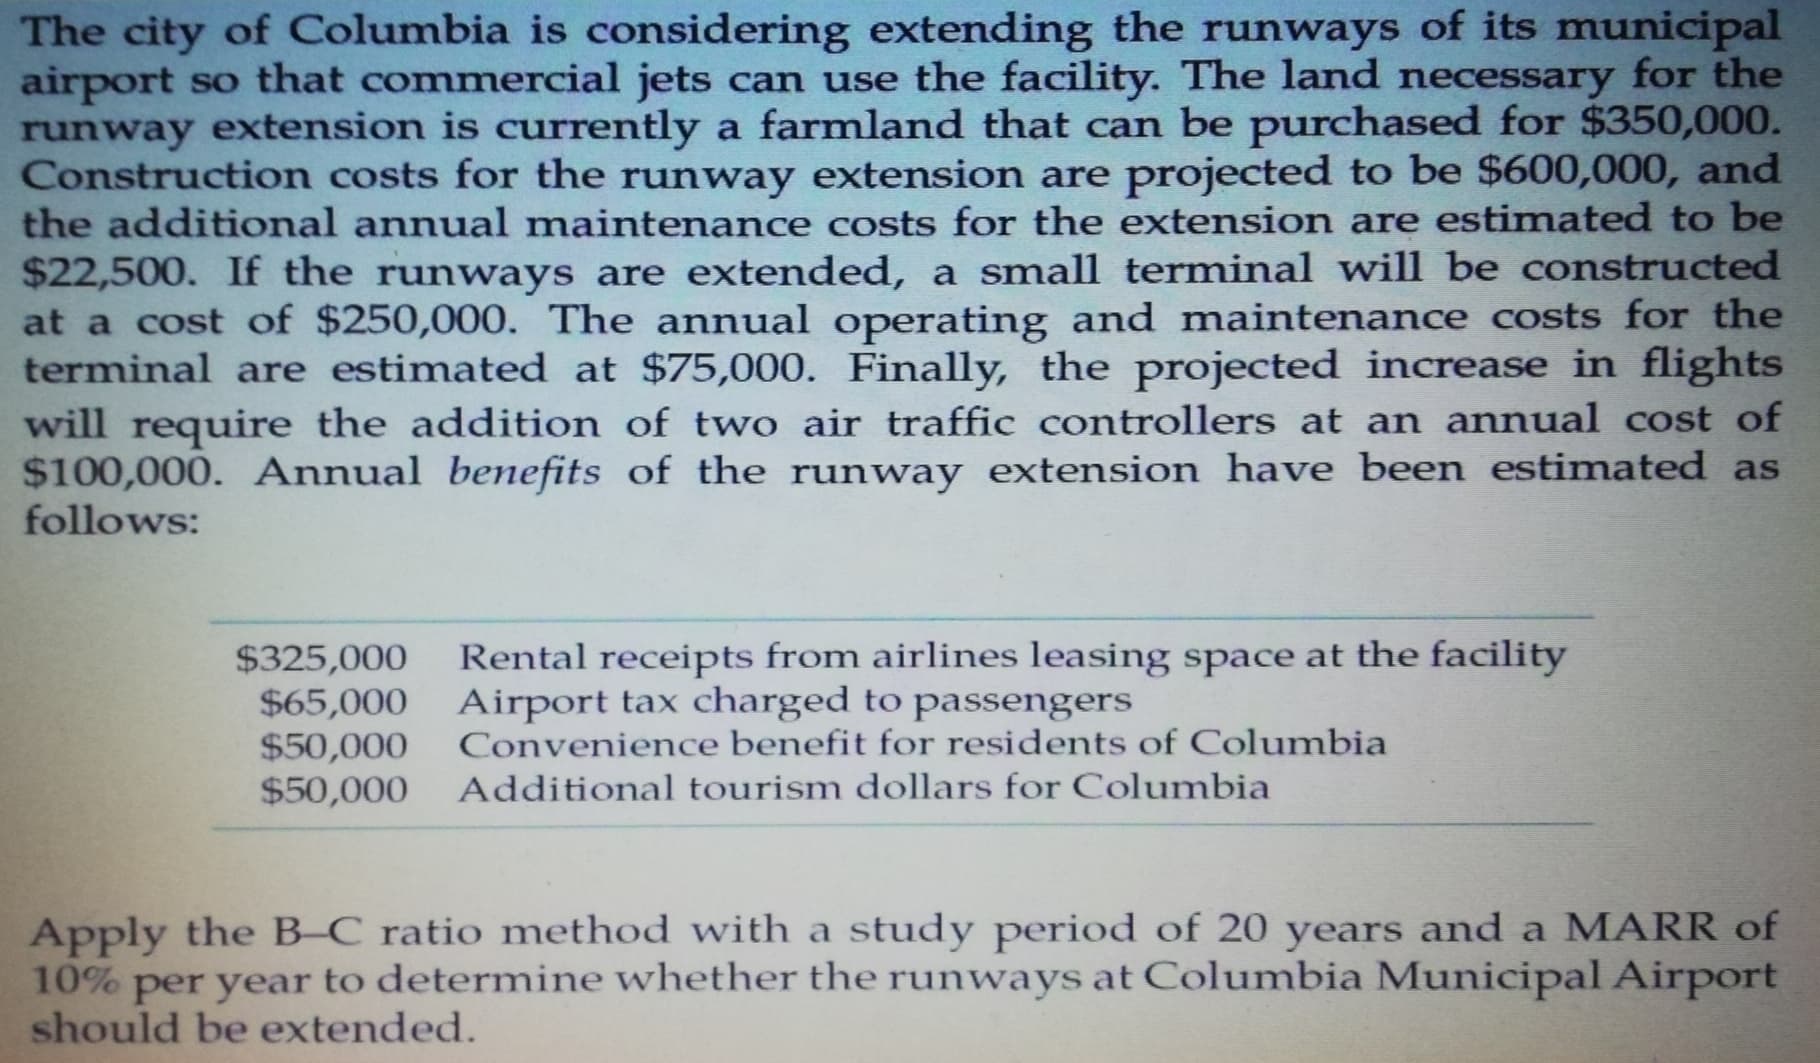 The city of Columbia is considering extending the runways of its municipal
airport so that commercial jets can use the facility. The land necessary for the
runway extension is currently a farmland that can be purchased for $350,000.
Construction costs for the runway extension are projected to be $600,000, and
the additional annual maintenance costs for the extension are estimated to be
$22,500. If the runways are extended, a small terminal will be constructed
at a cost of $250,000. The annual operating and maintenance costs for the
terminal are estimated at $75,000. Finally, the projected increase in flights
will require the addition of two air traffic controllers at an annual cost of
$100,000. Annual bemefits of the runway extension have been estimated as
follows:
Rental receipts from airlines leasing space at the facility
$325,000
$65,000 Airport tax charged to passengers
$50,000
$50,000
Convenience benefit for residents of Columbia
Additional tourism dollars for Columbia
Apply the B-C ratio method with a study period of 20 years and a MARR of
10% per year to determine whether the runways at Columbia Municipal Airport
should be extended.
